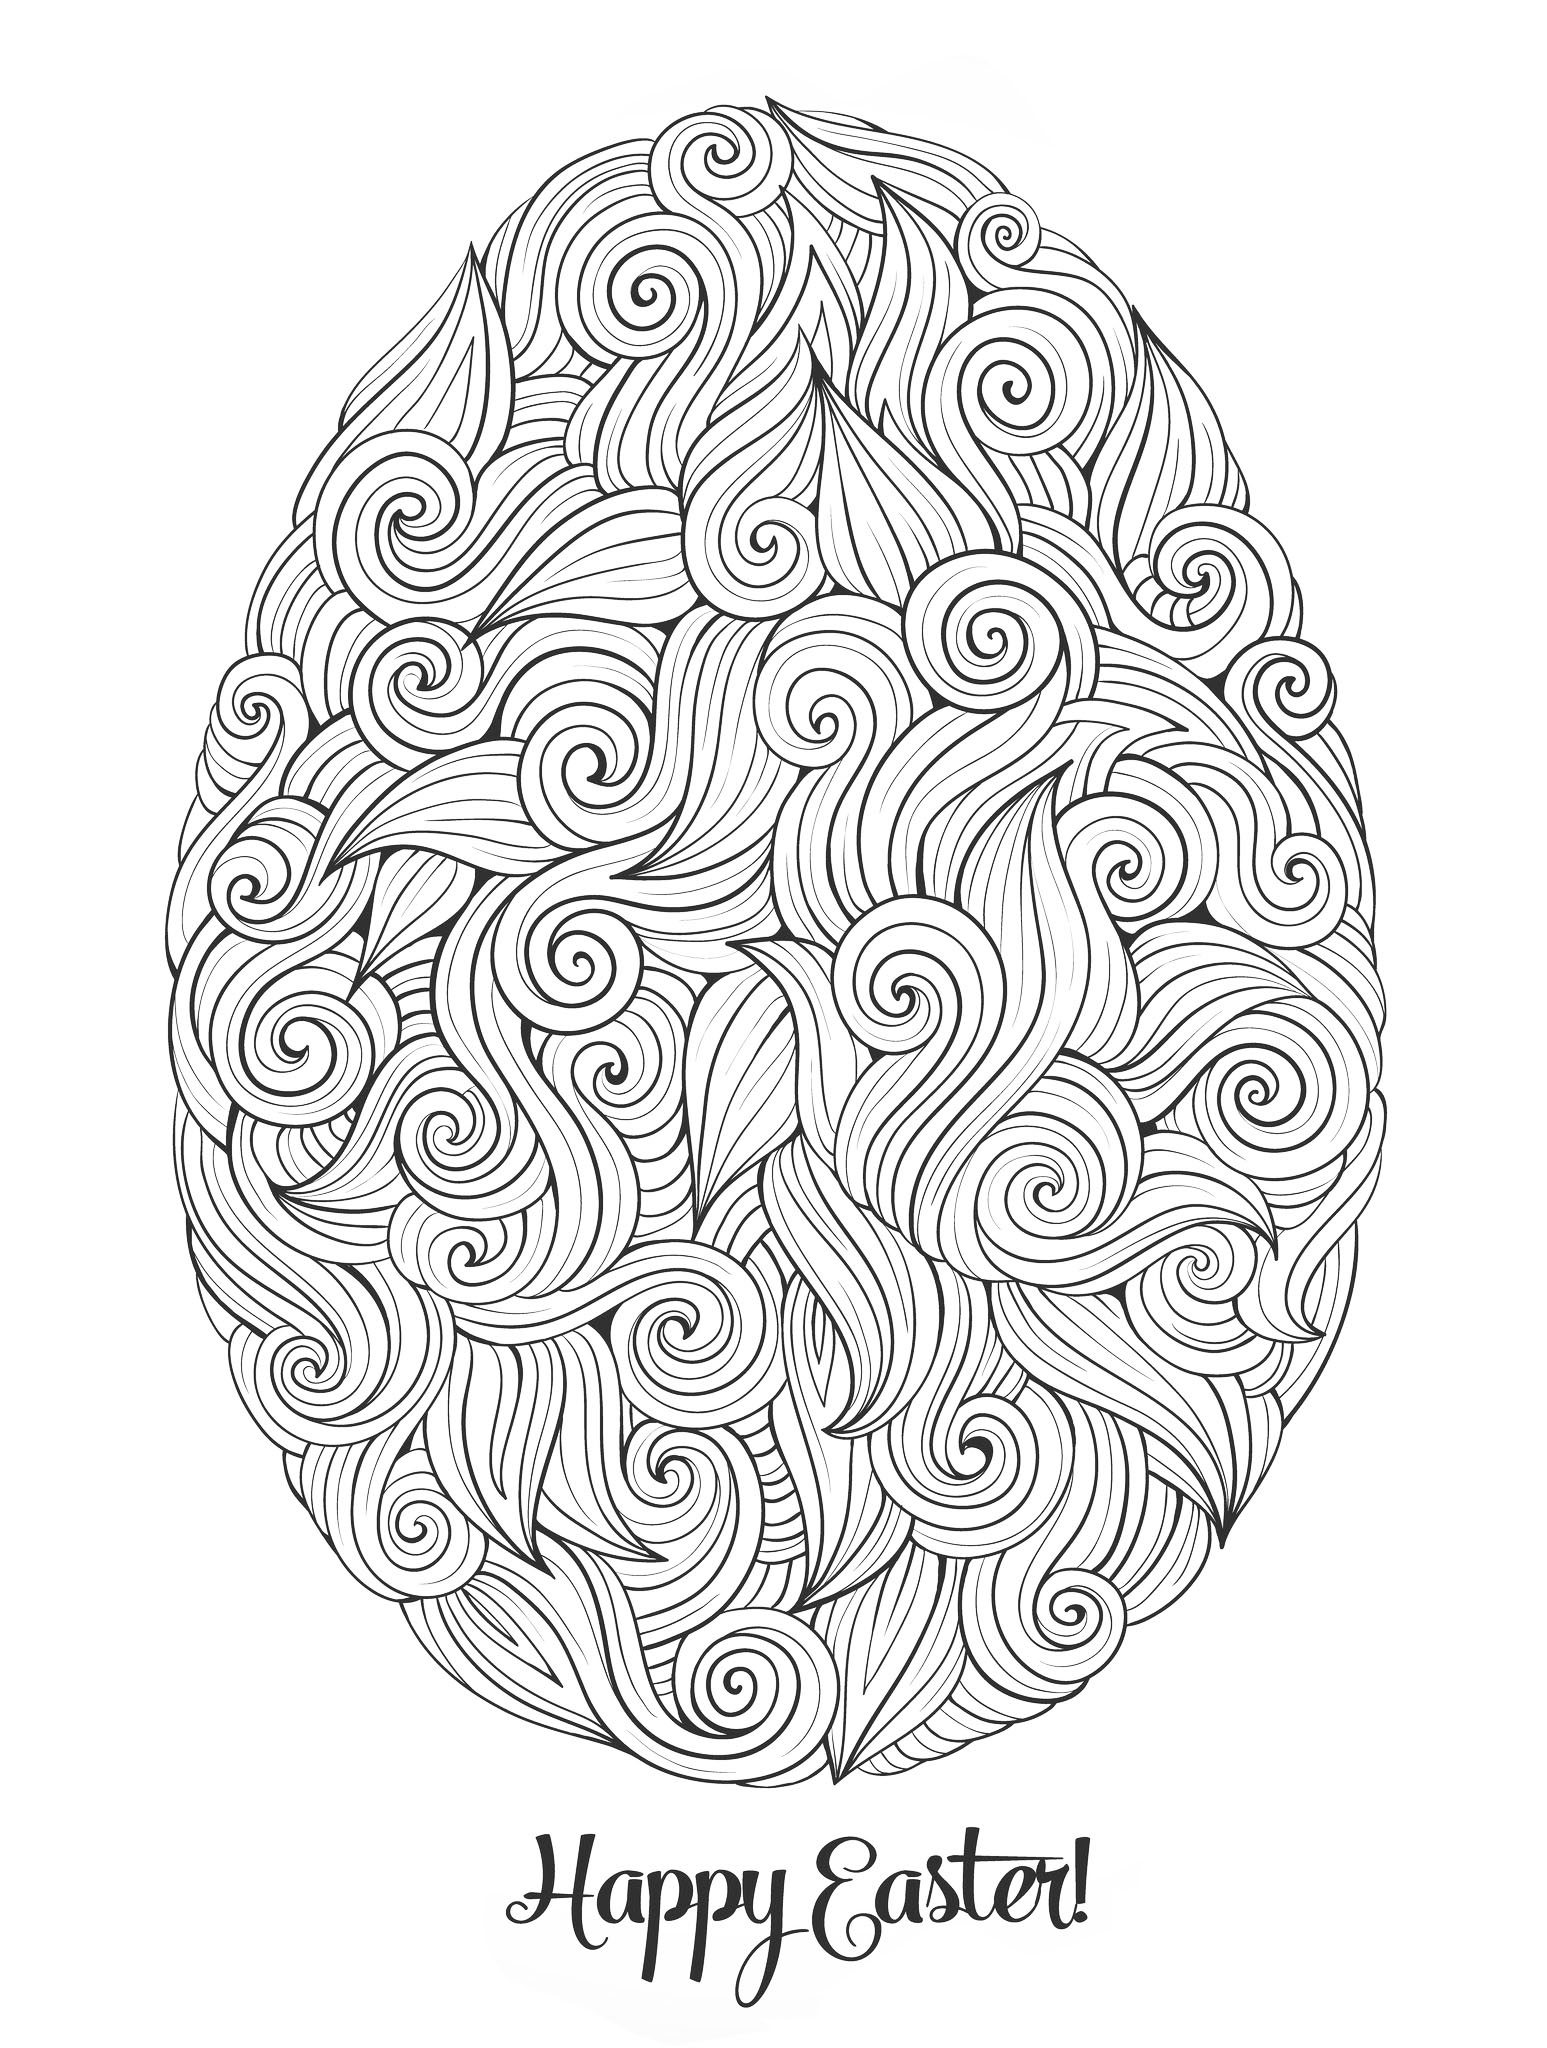 Color this beautiful Easter coloring with your favorite colors